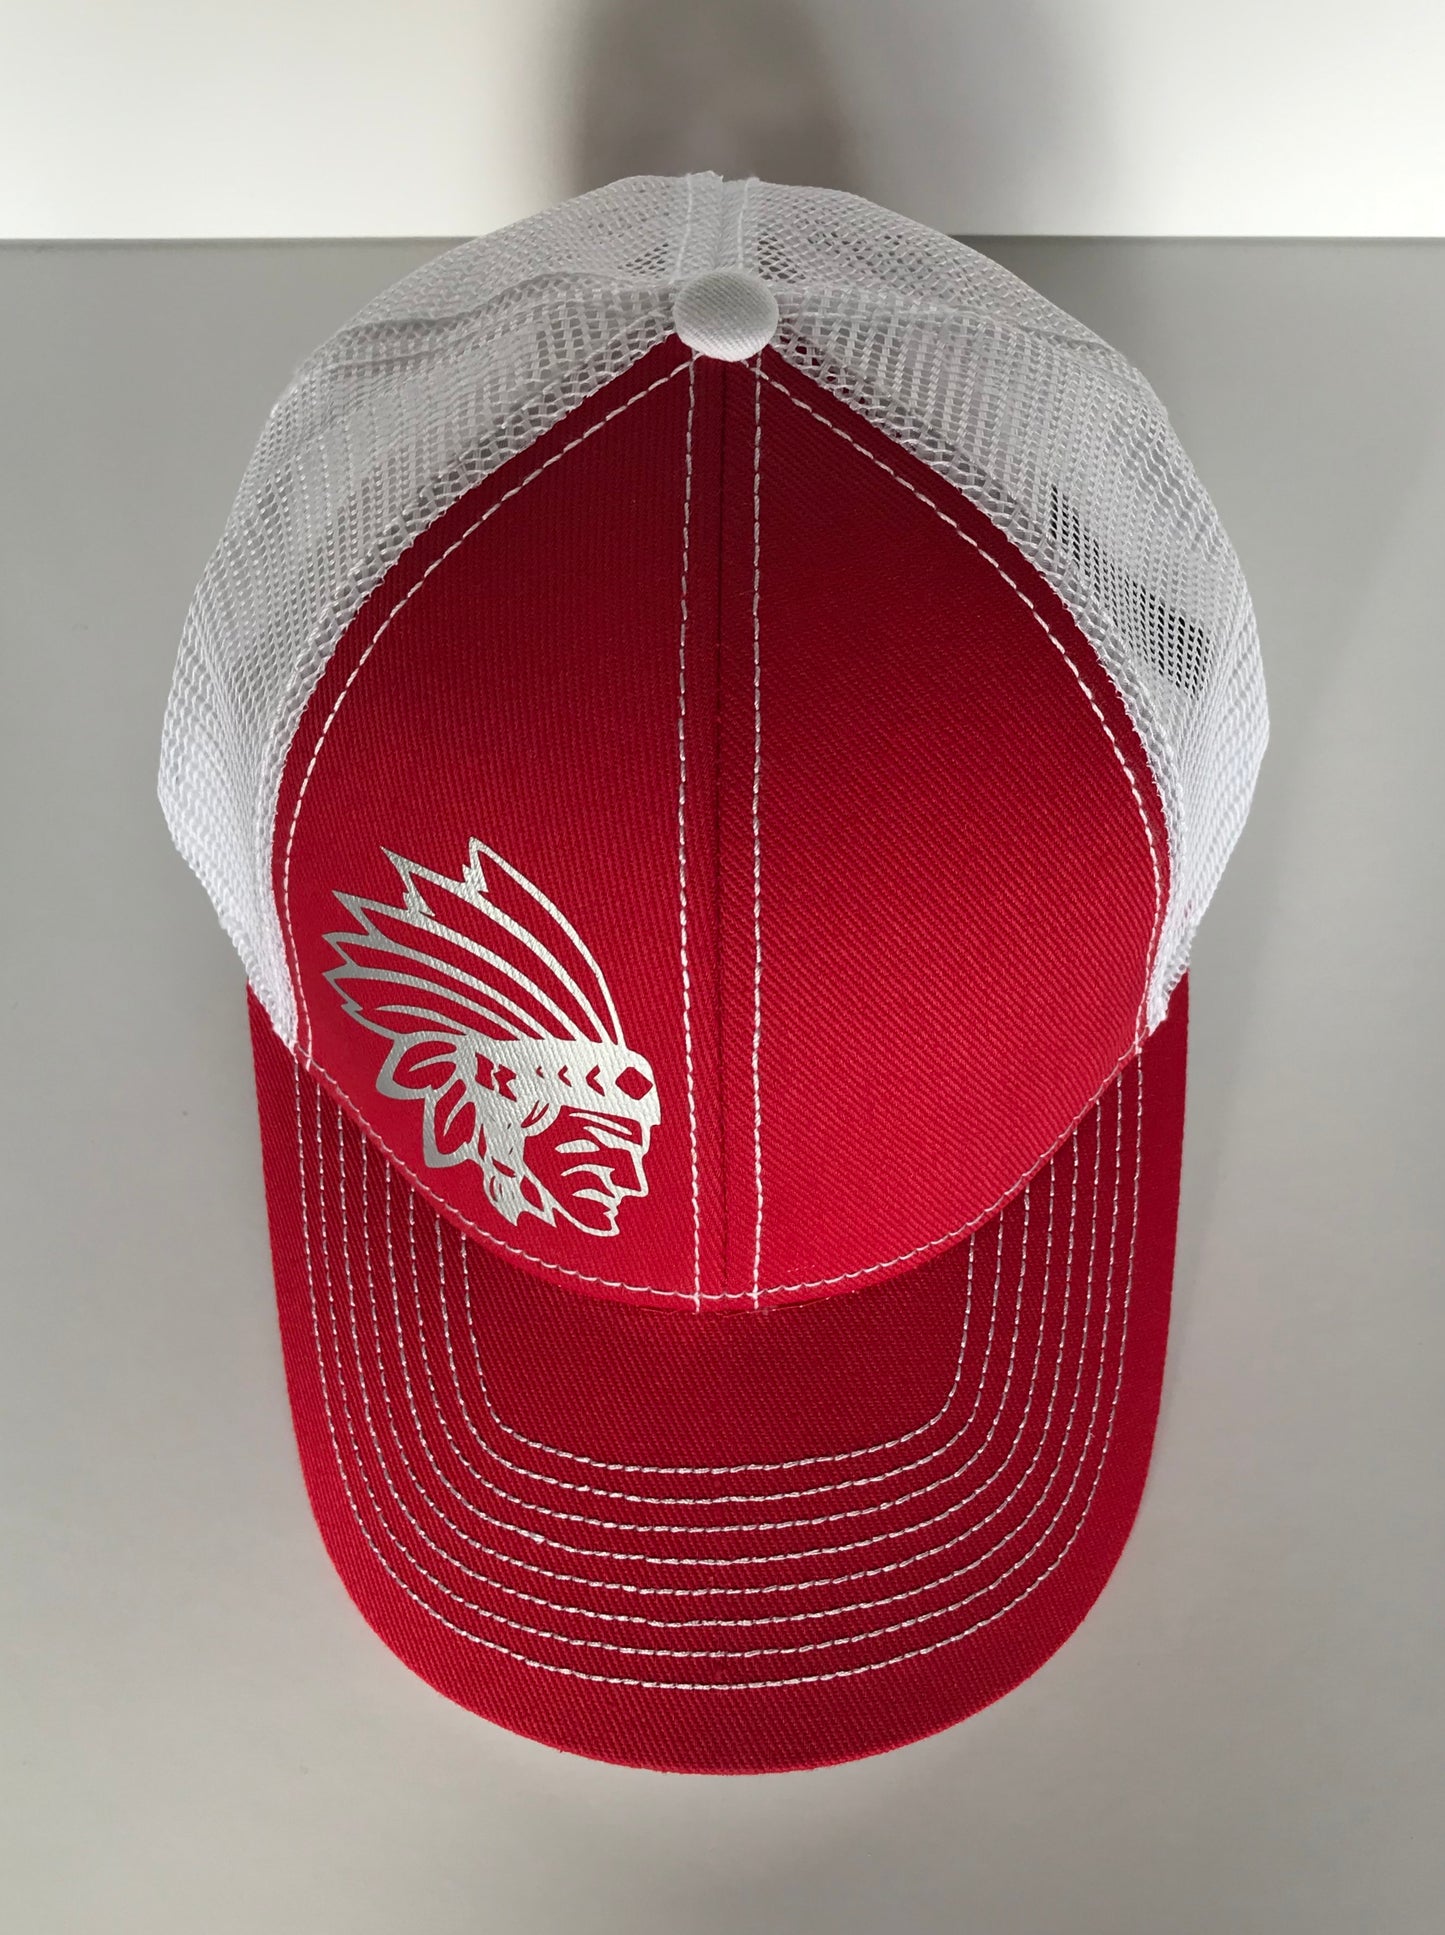 Low Profile Knox Redskins Hat - Adjustable - Red/White/Silver - Alternate Color Stitching